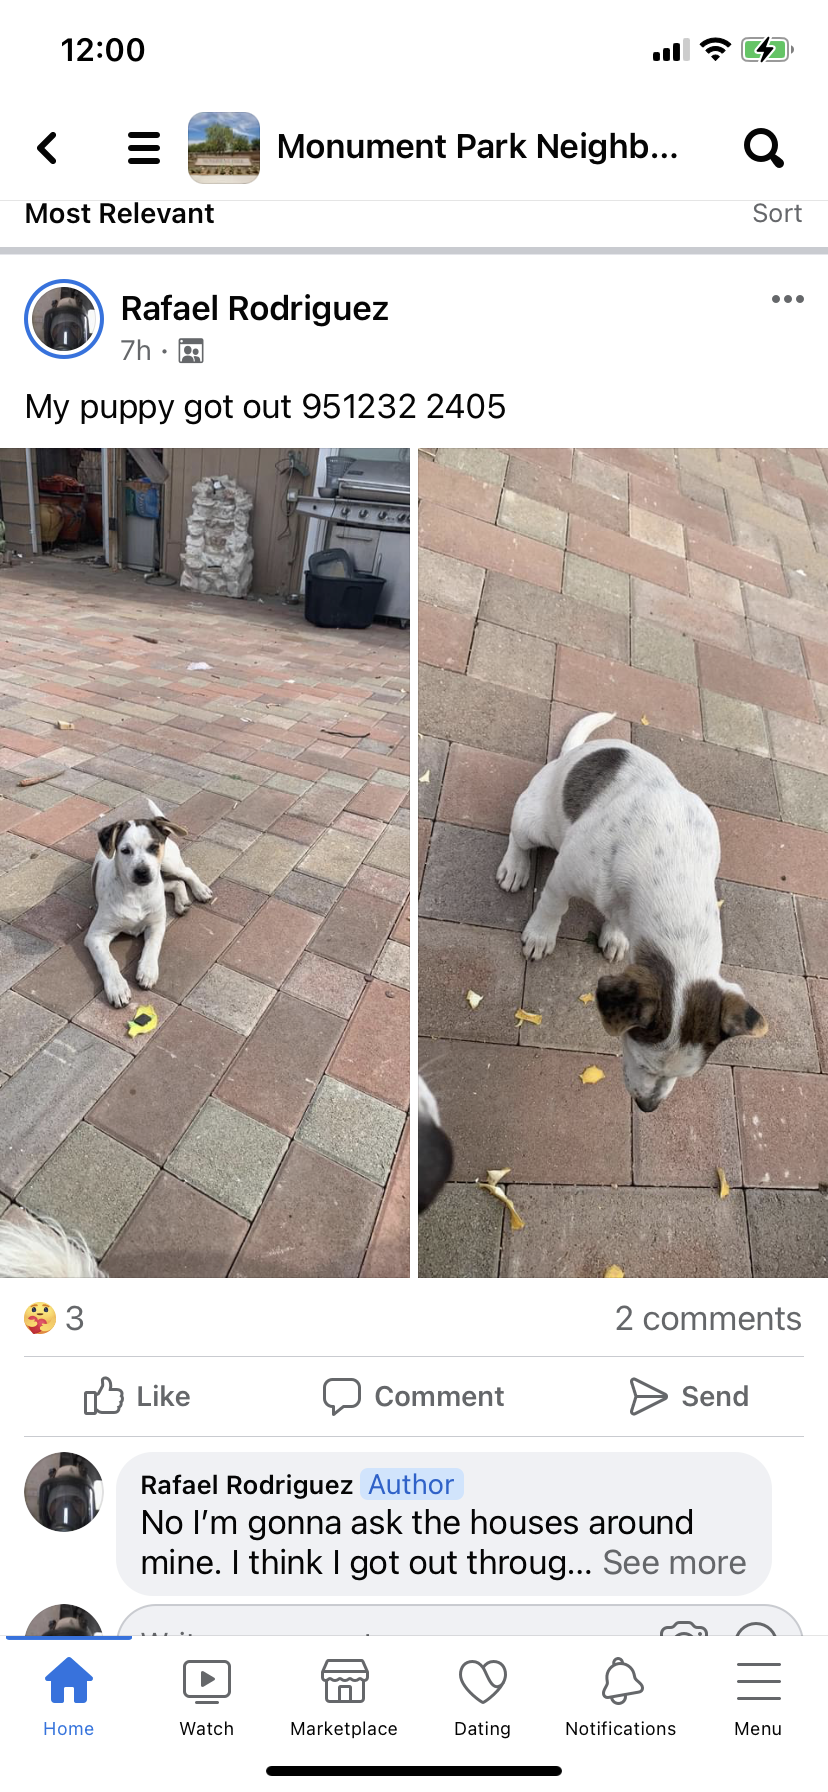 Image of Doggie, Lost Dog